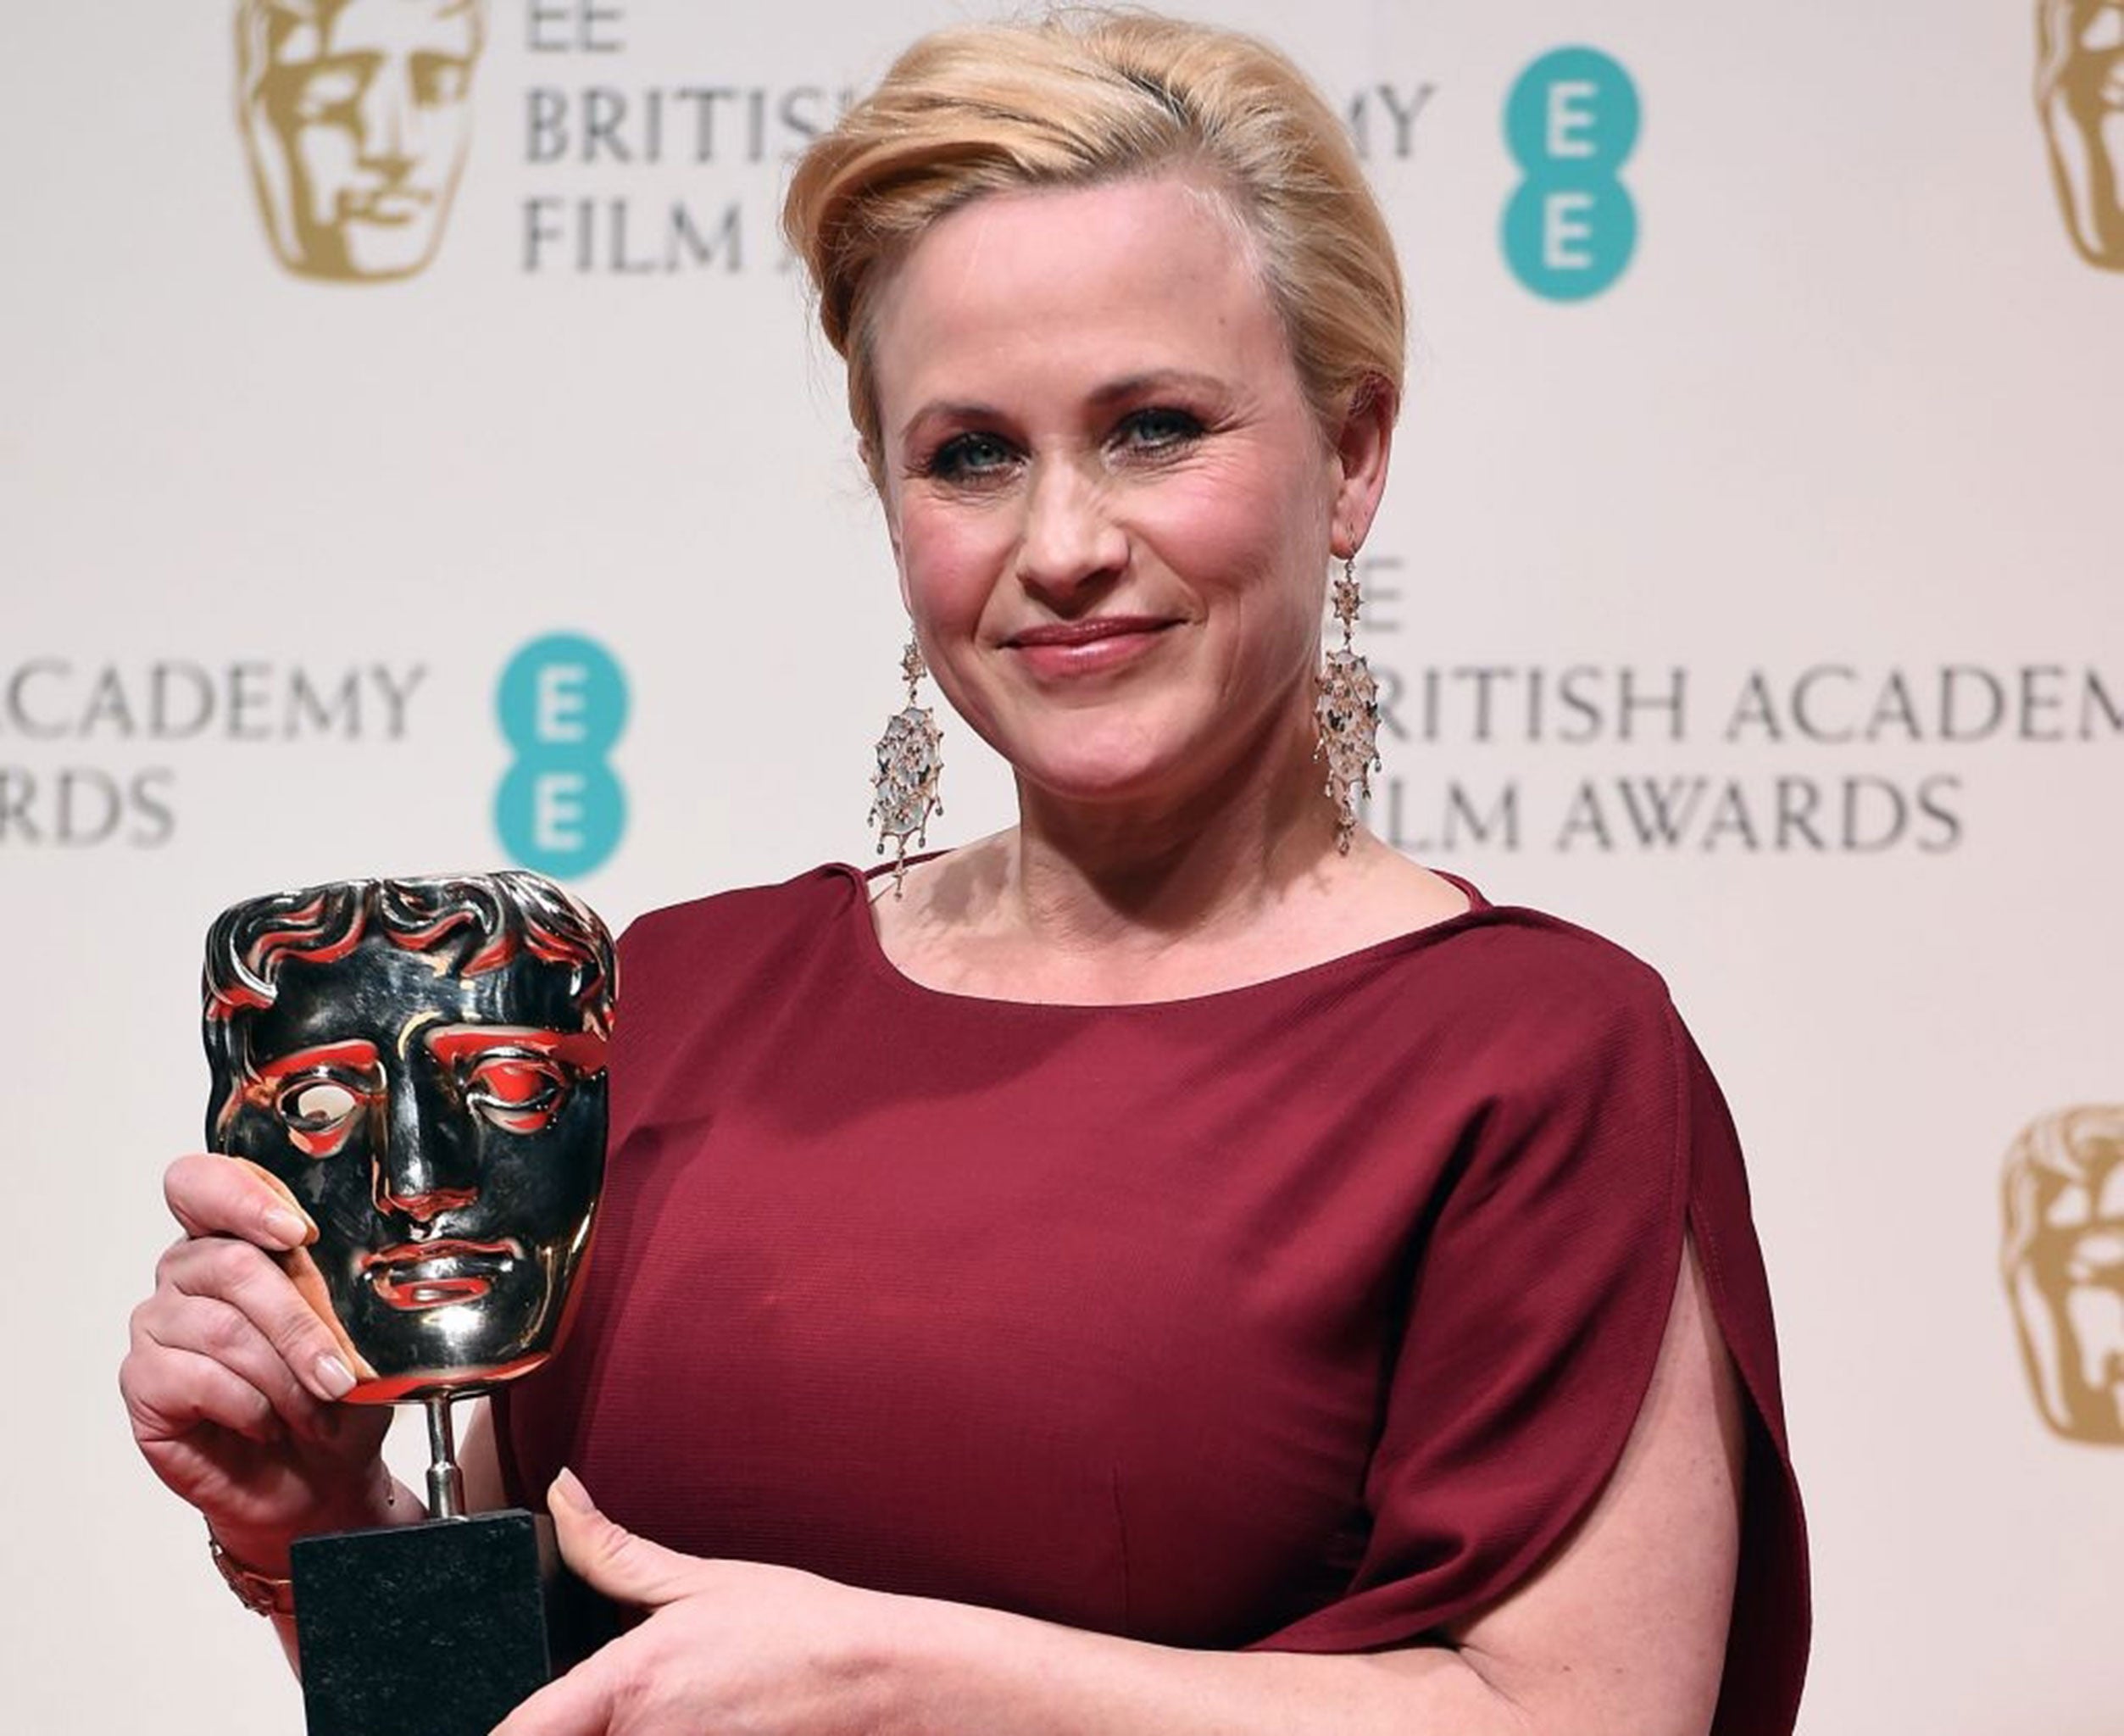 Patricia Arquette poses in the press room after winning the Best Supporting Actress award for her performance in Boyhood